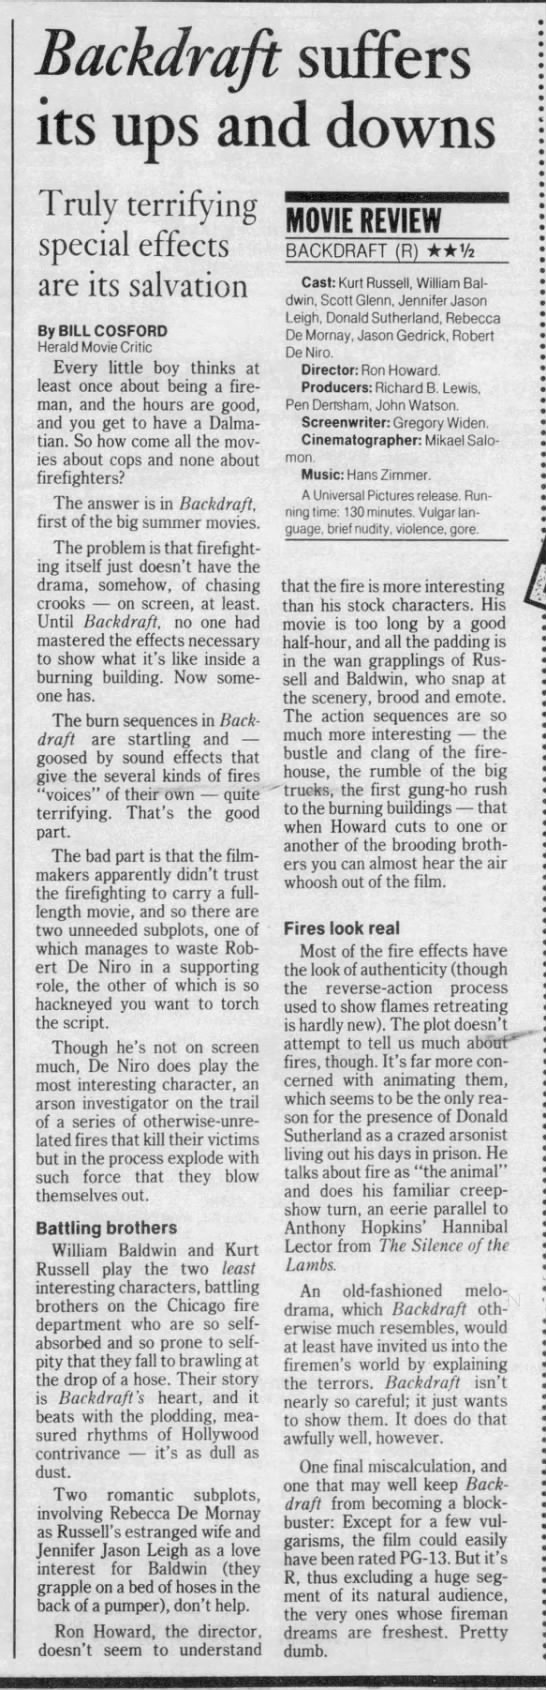 Miami Herald Backdraft review* - 